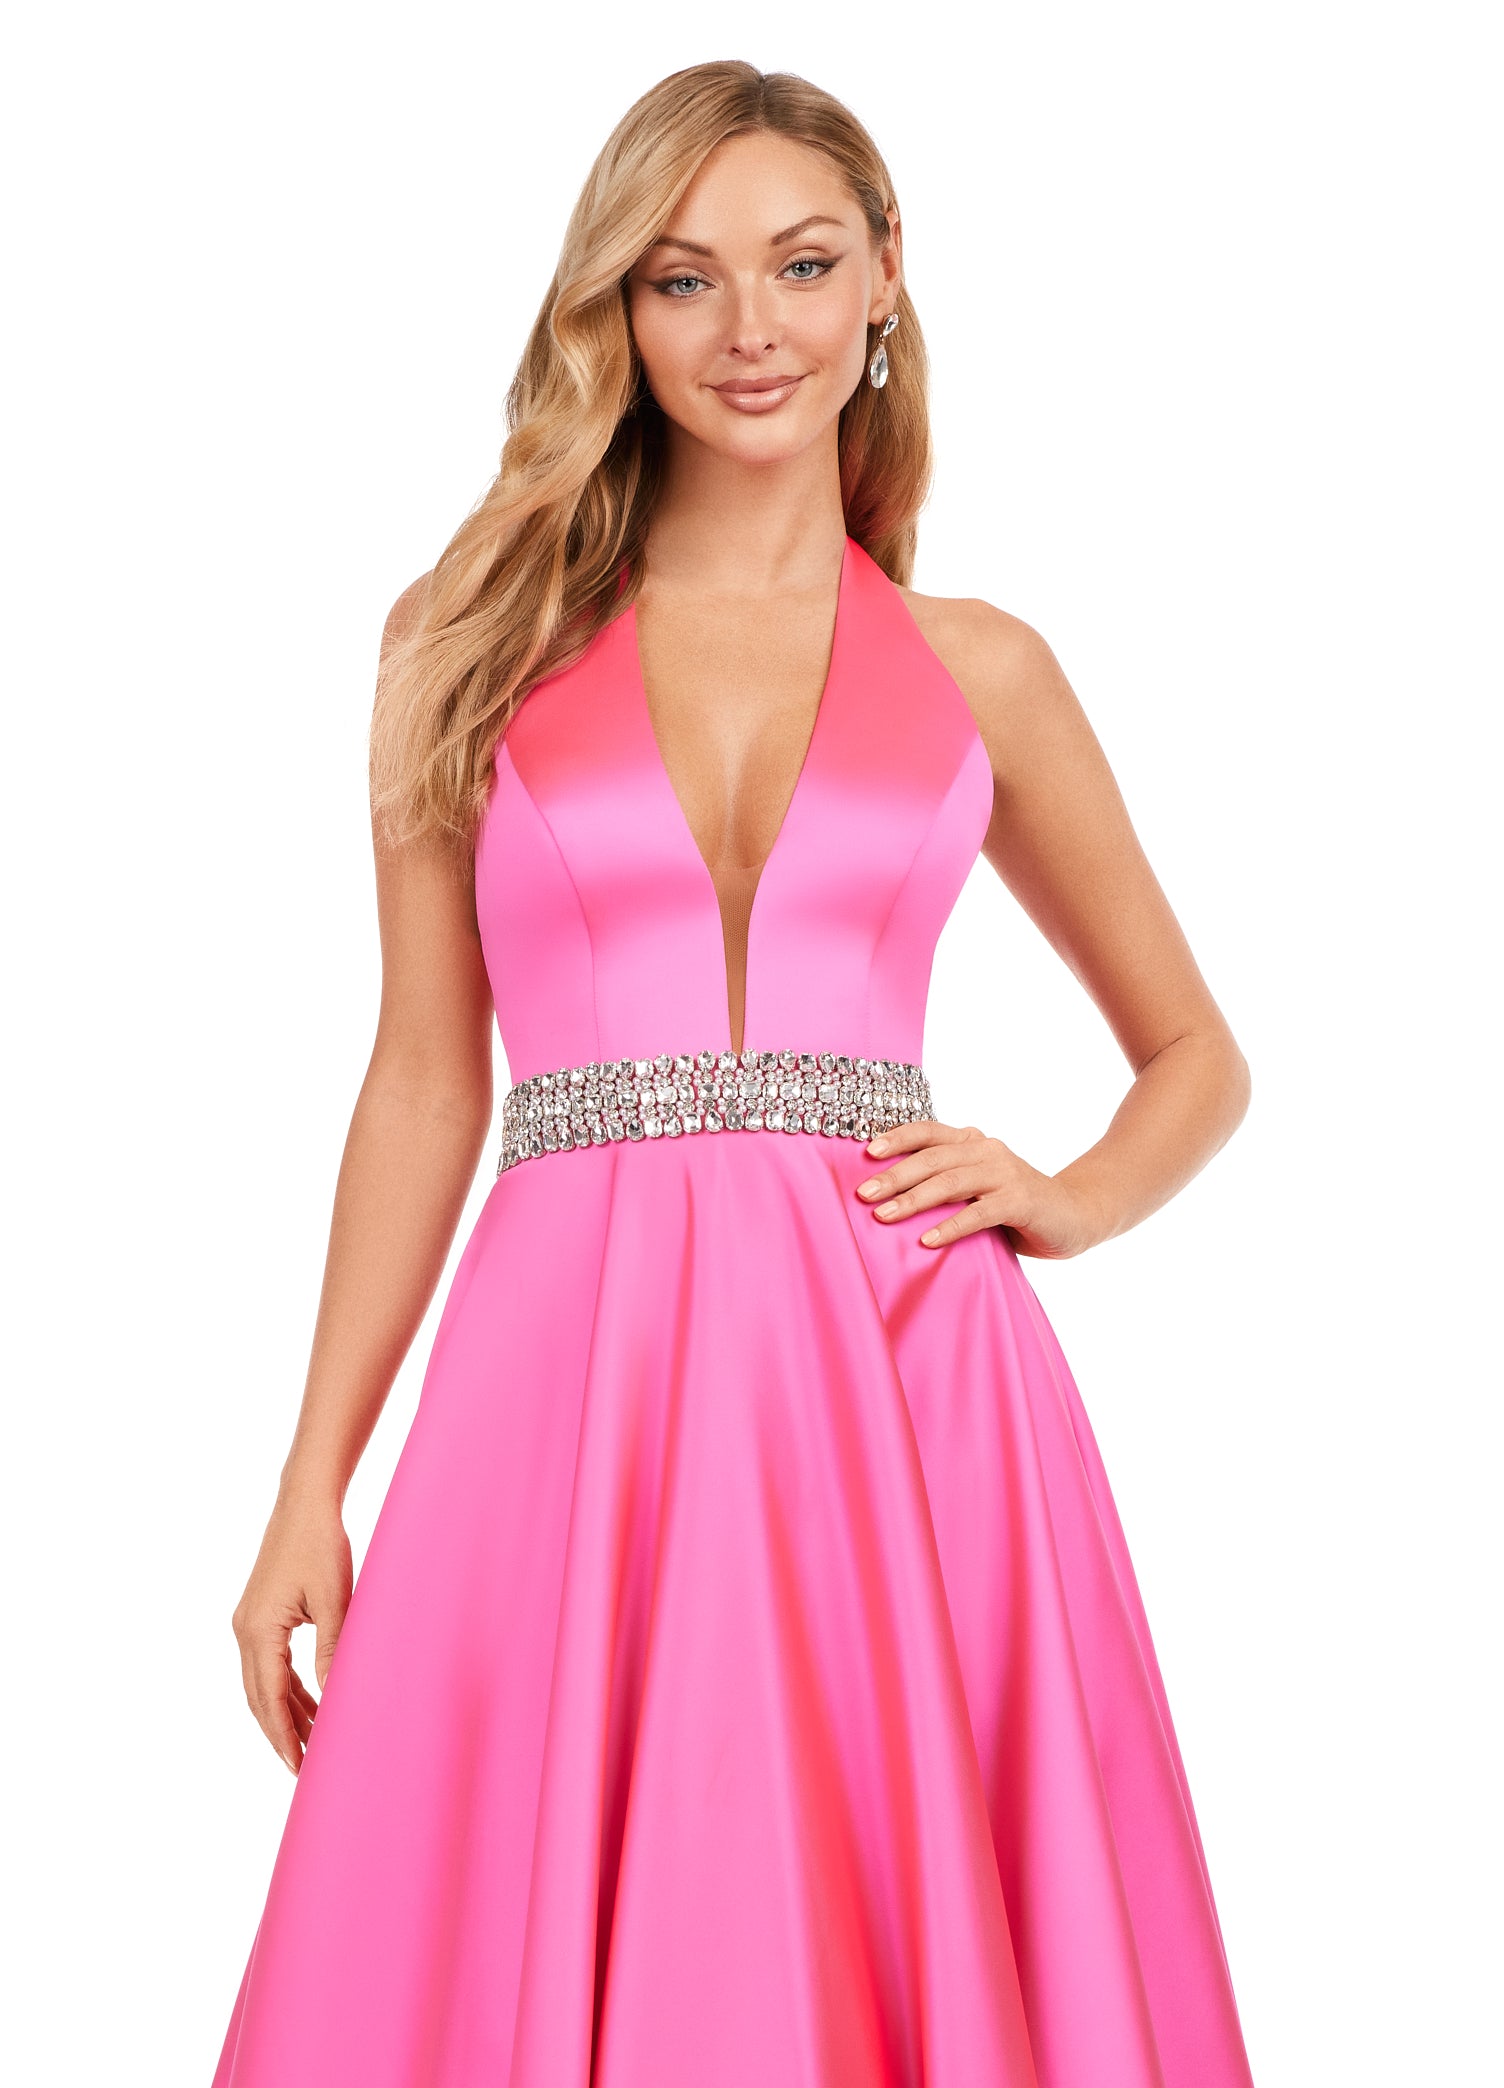 Style T934 Lightweight Chiffon Halter Neck A-Line Gown with Lace Bodice